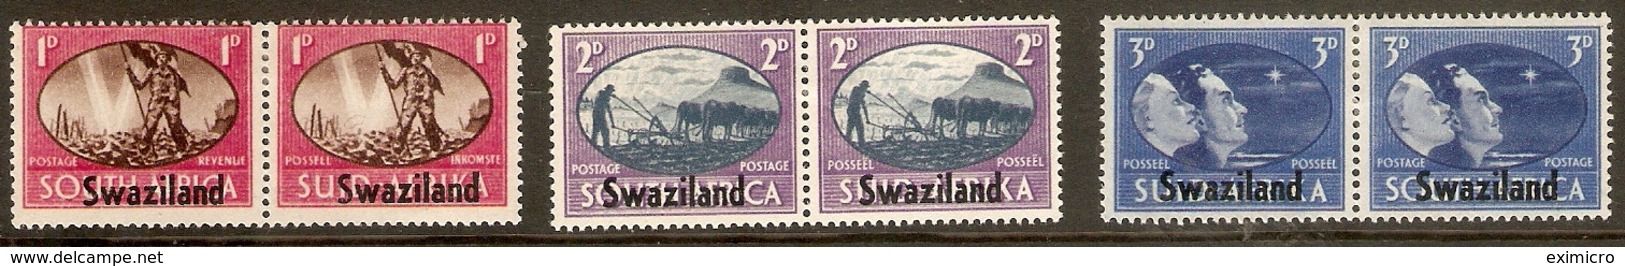 SWAZILAND 1945 VICTORY SET INCLUDING BARBED WIRE FLAW VARIETY SG 39a/41 (LIGHTLY) MOUNTED MINT Cat £16+ - Swaziland (...-1967)